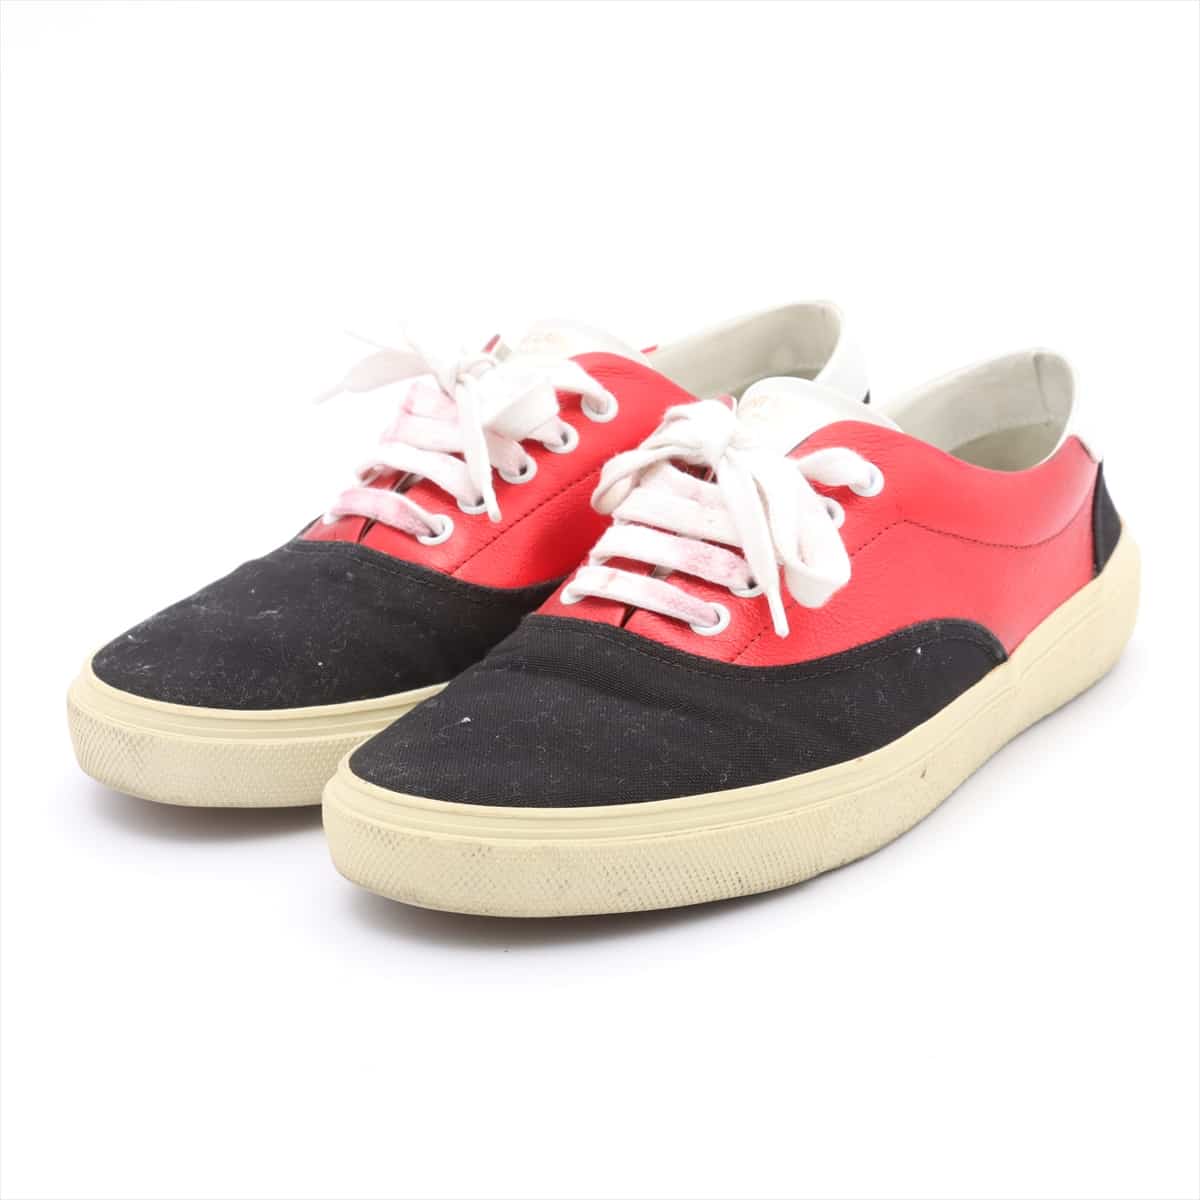 Saint Laurent Paris Canvas & leather Sneakers 41.5 Men's Red There is shoelace transfer